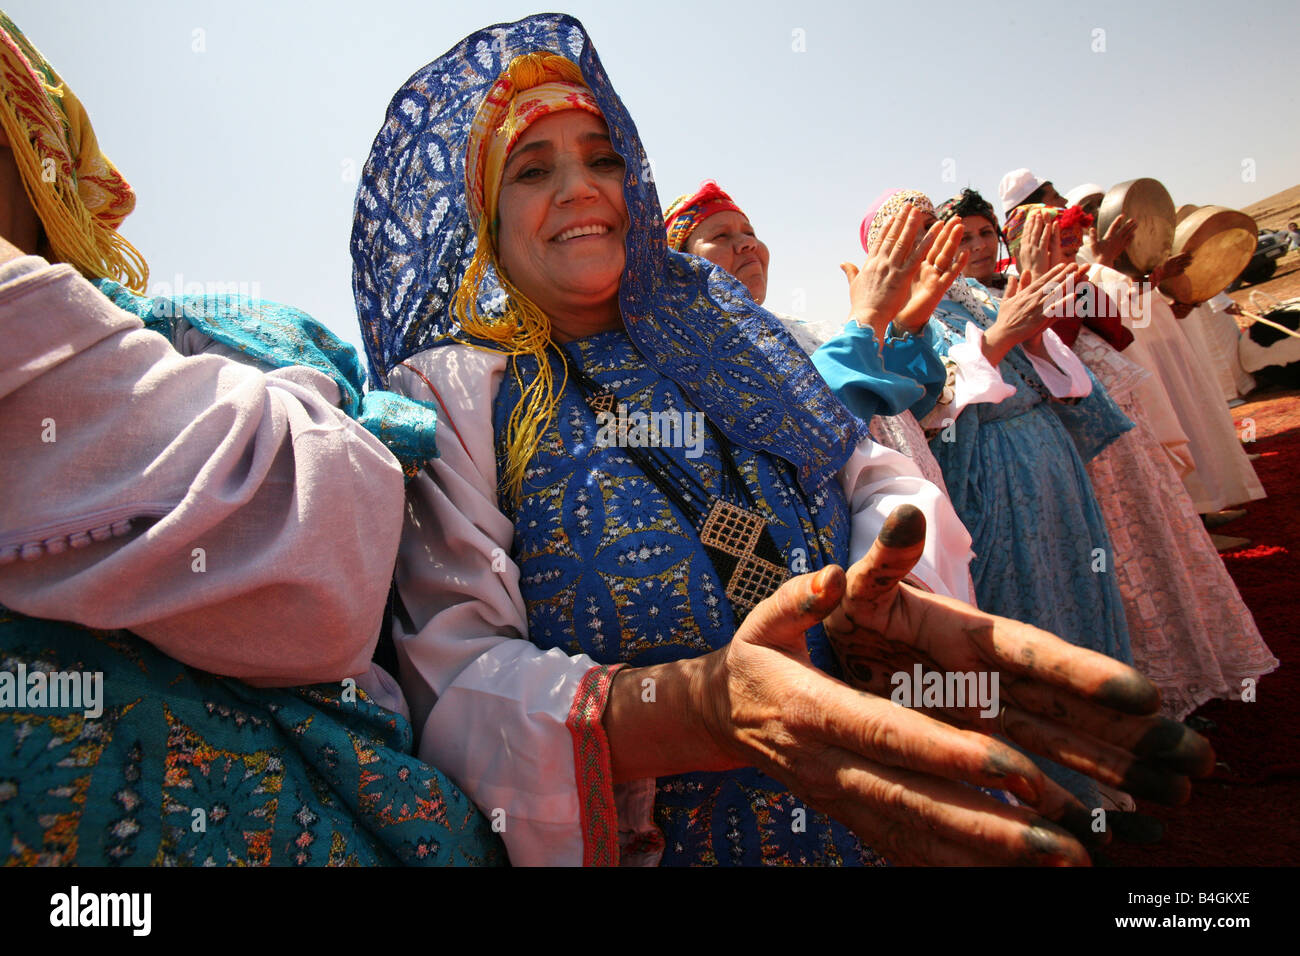 Berber women in traditional dress singing on Kik Plateau, Atlas Mountains, Morocco, North Africa Stock Photo